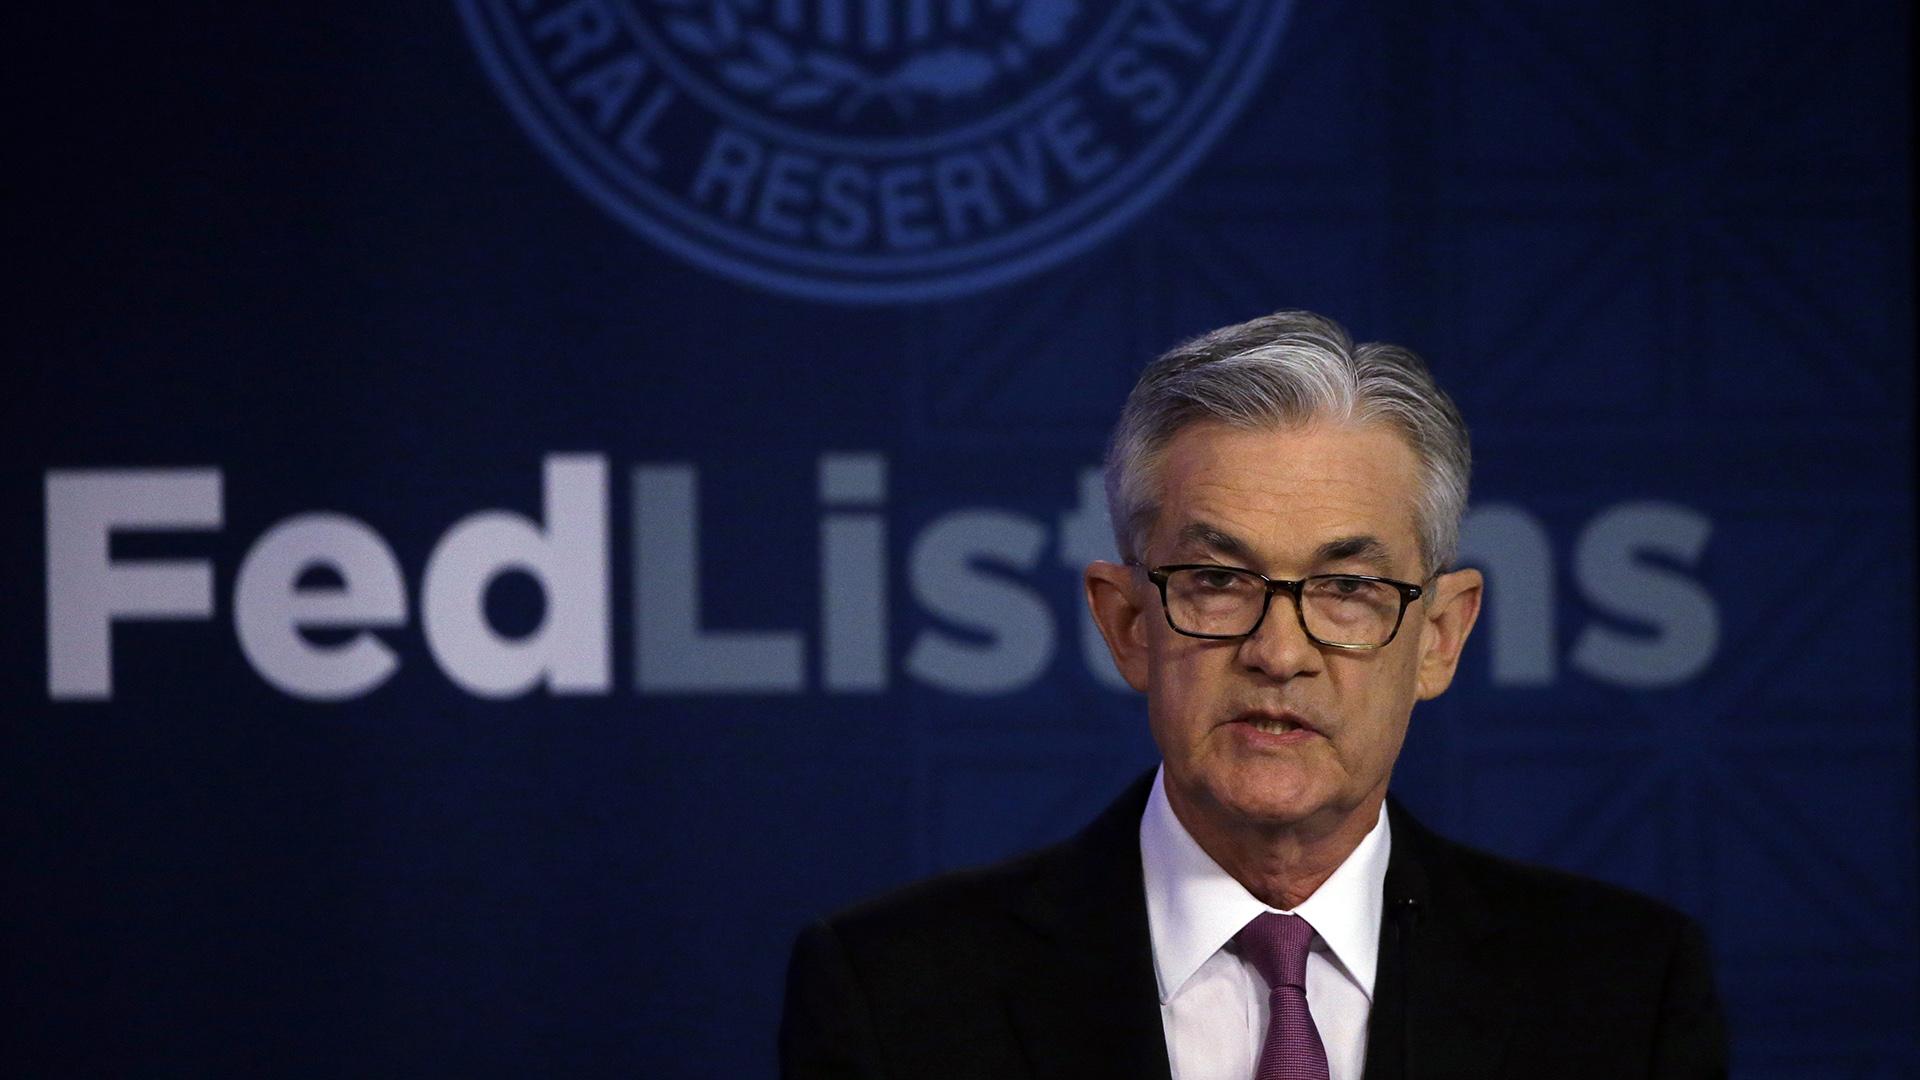 Federal Reserve Chairman Jerome Powell speaks Tuesday, June 4, 2019 at a conference involving its review of its interest-rate policy strategy and communications in Chicago. (AP Photo / Kiichiro Sato)